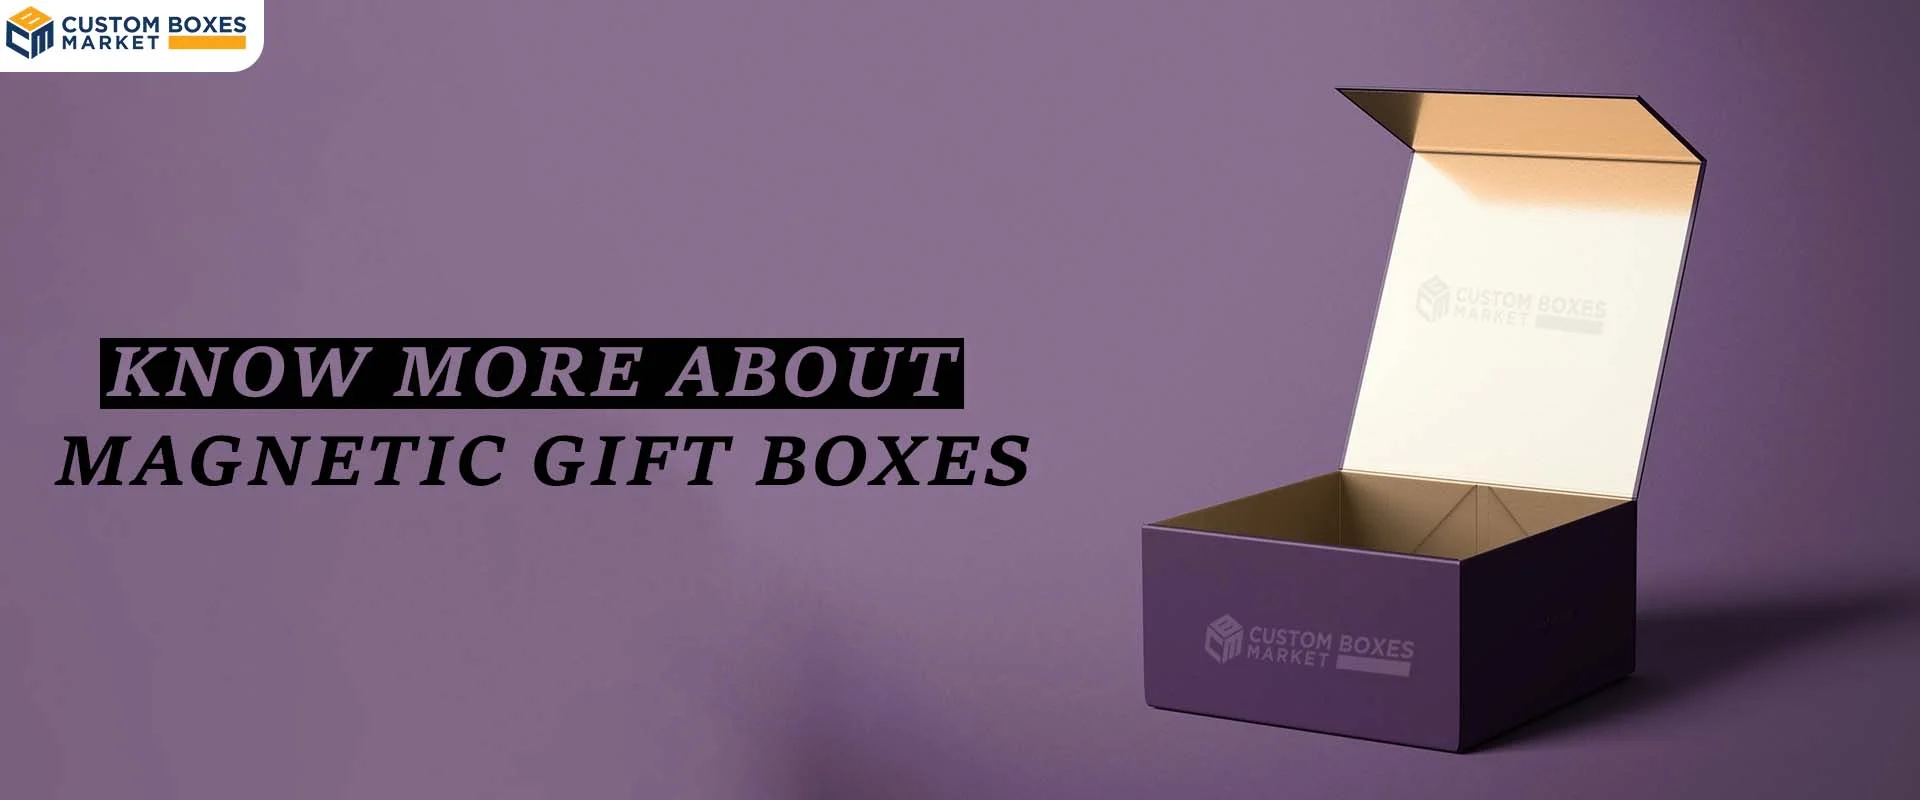 Know More About Magnetic Gift Boxes